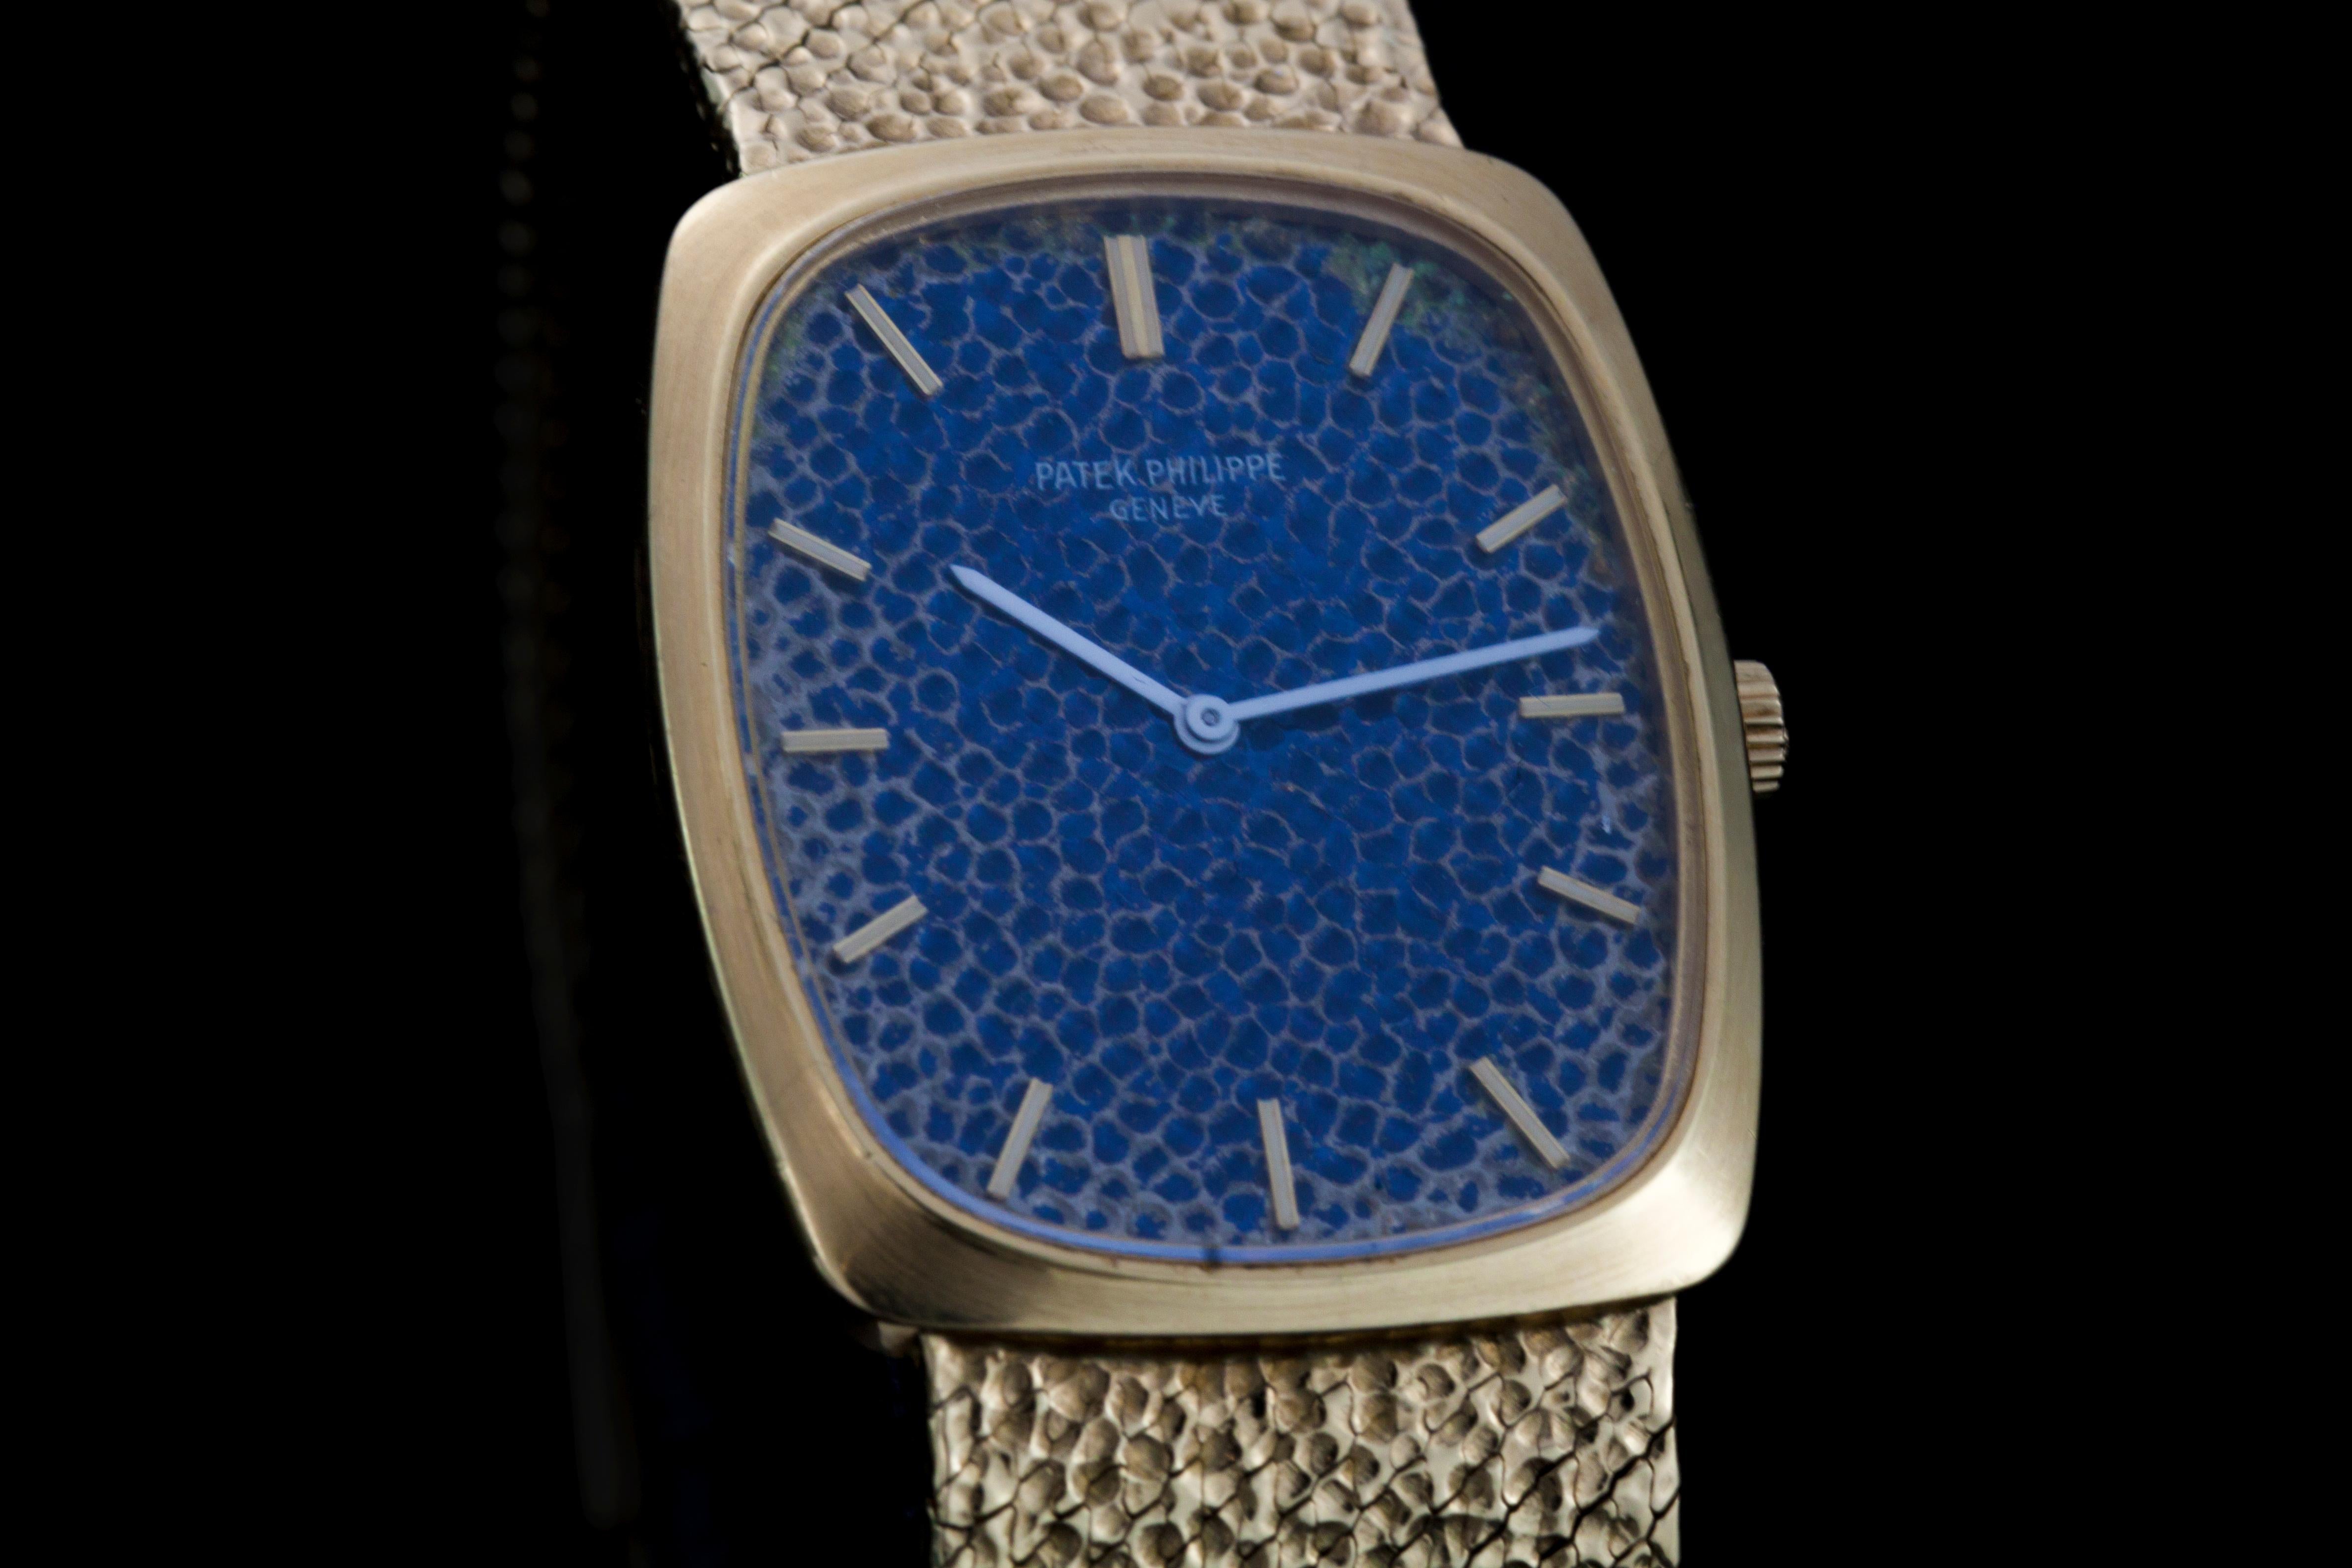 Patek Philippe full 18kt yellow gold watch ref 3567
Made in 1980's

Ref: 3567
Gender: Unisex
Case Size: 26 mm
Movement: Manual Winding
Watchband Material: 18kt gold
Case material : 18kt gold
Display Type: Analogue
Dial: Blue
Box / Papers :